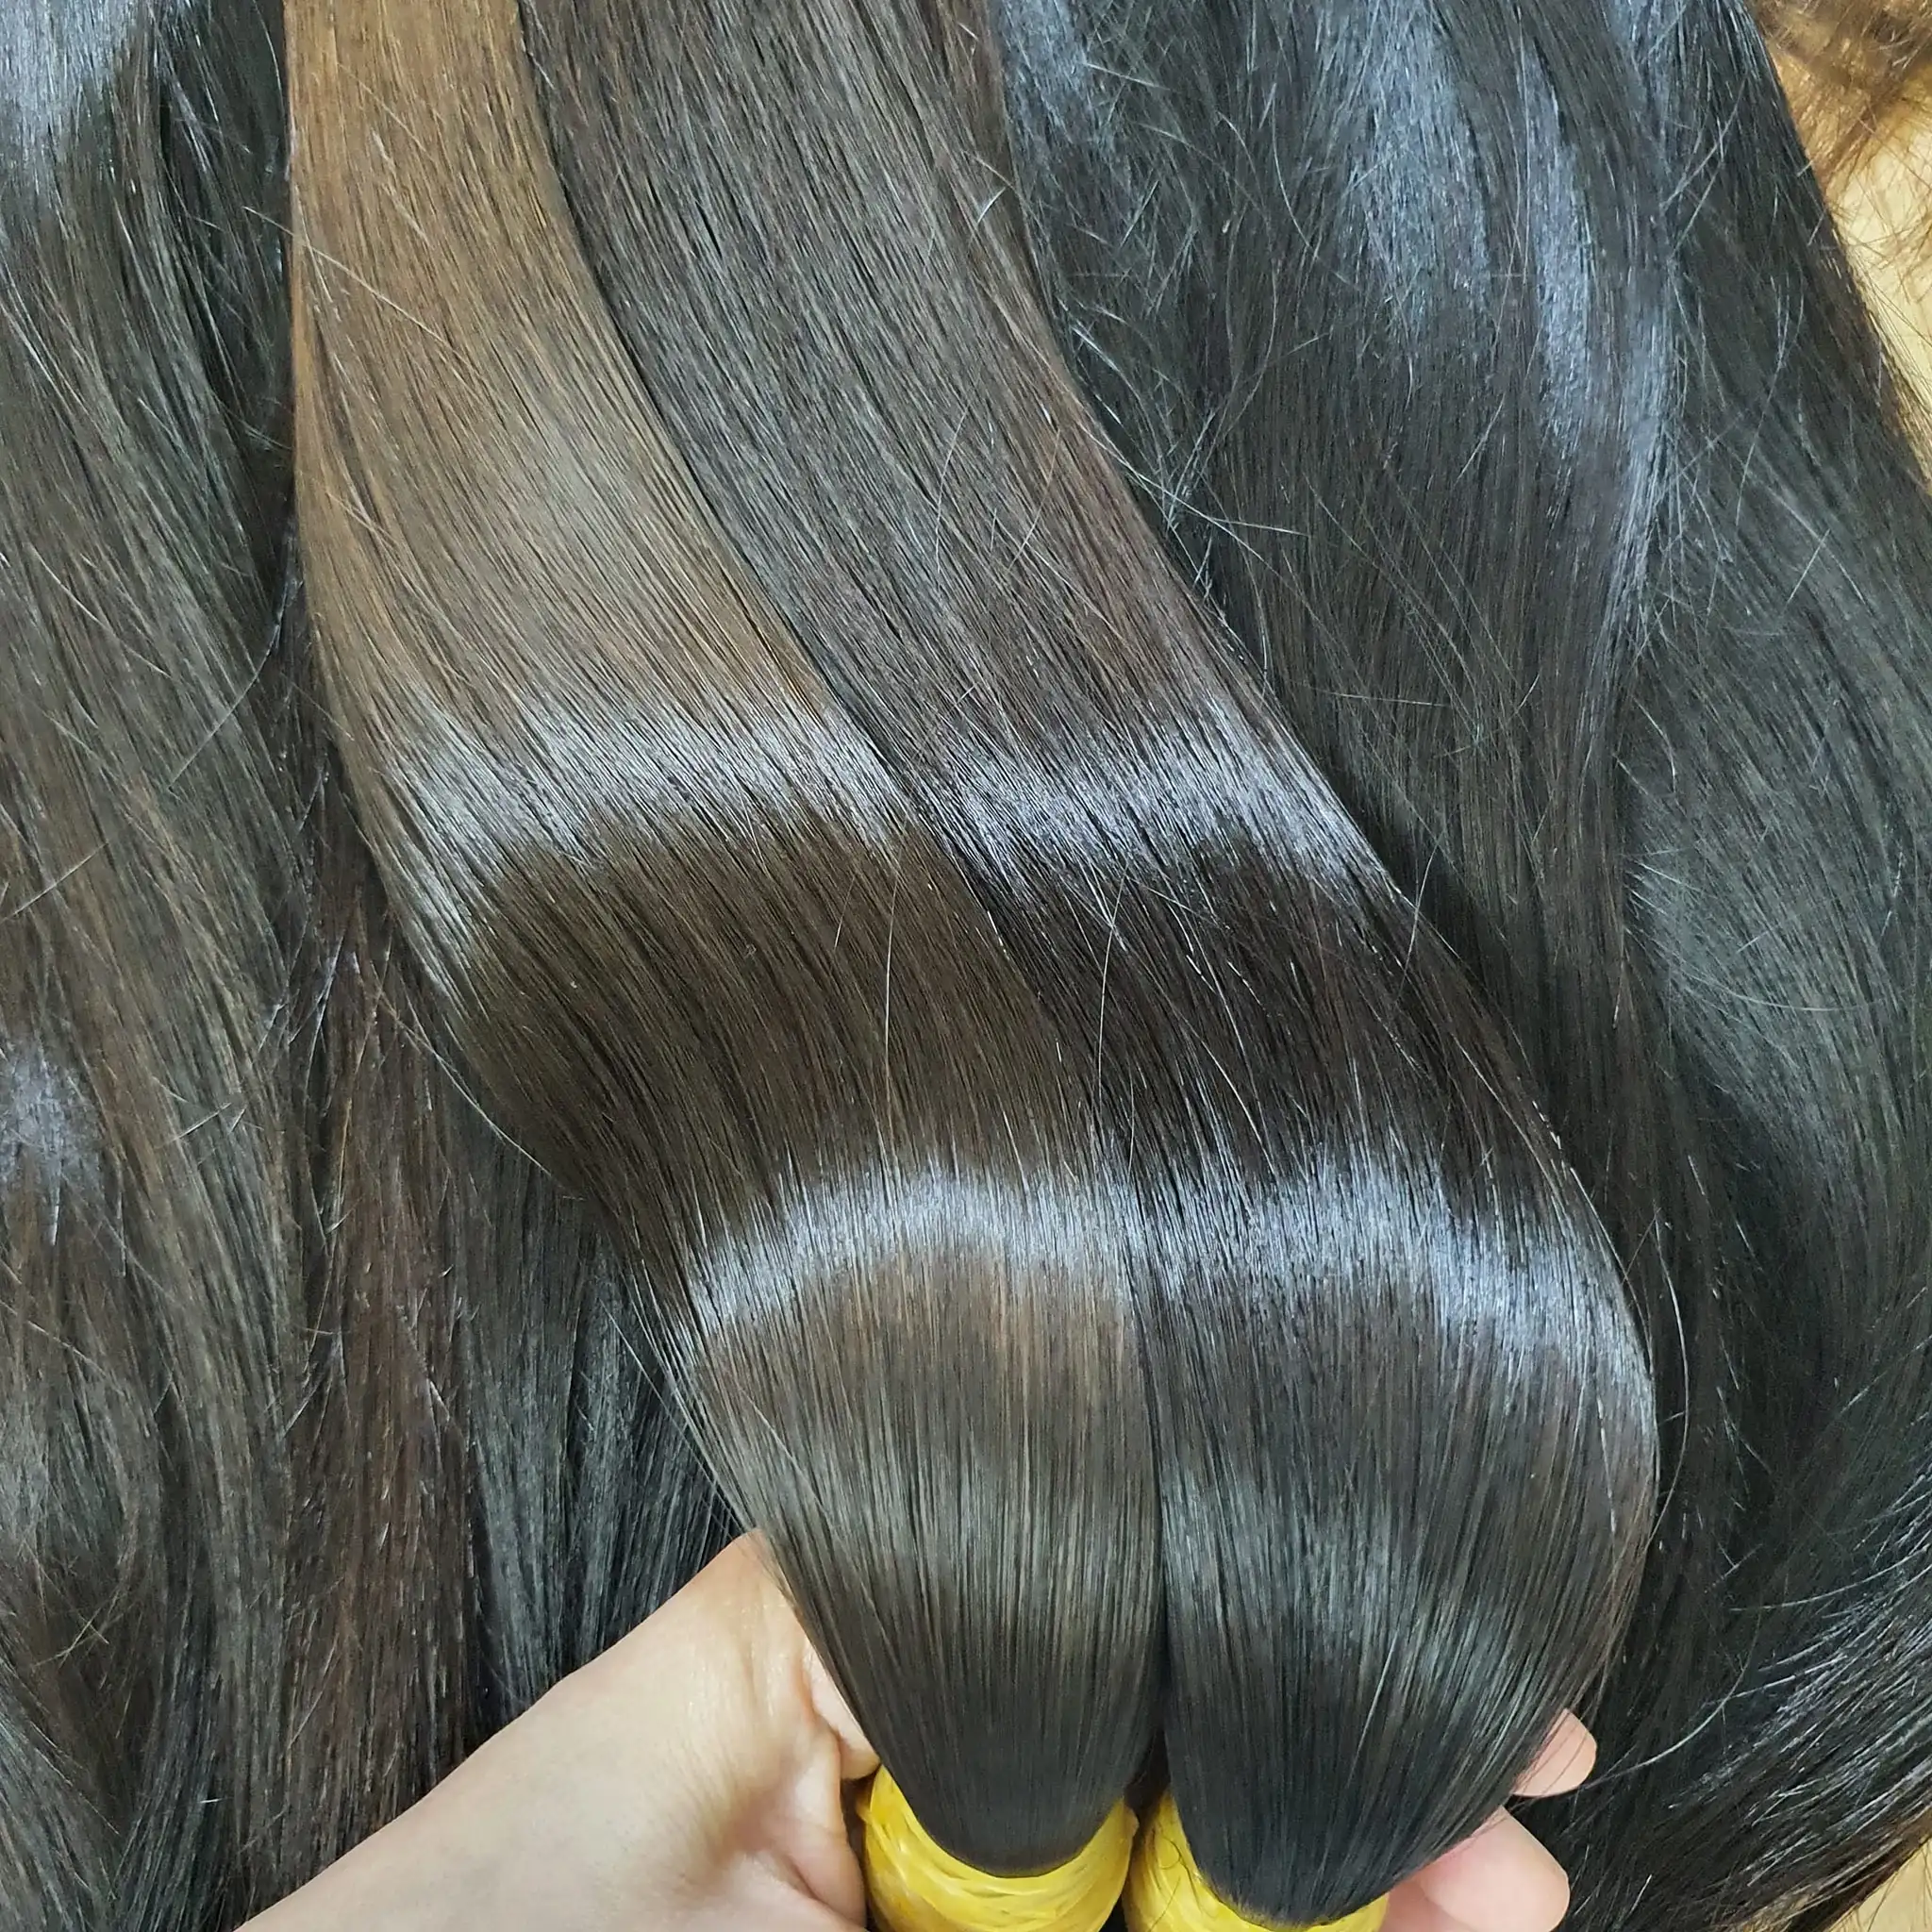 Popular Raw Cuticle Aligned Hair Natural Vietnamese Straight Hair Weaving Without Any Process, Just Best Quality